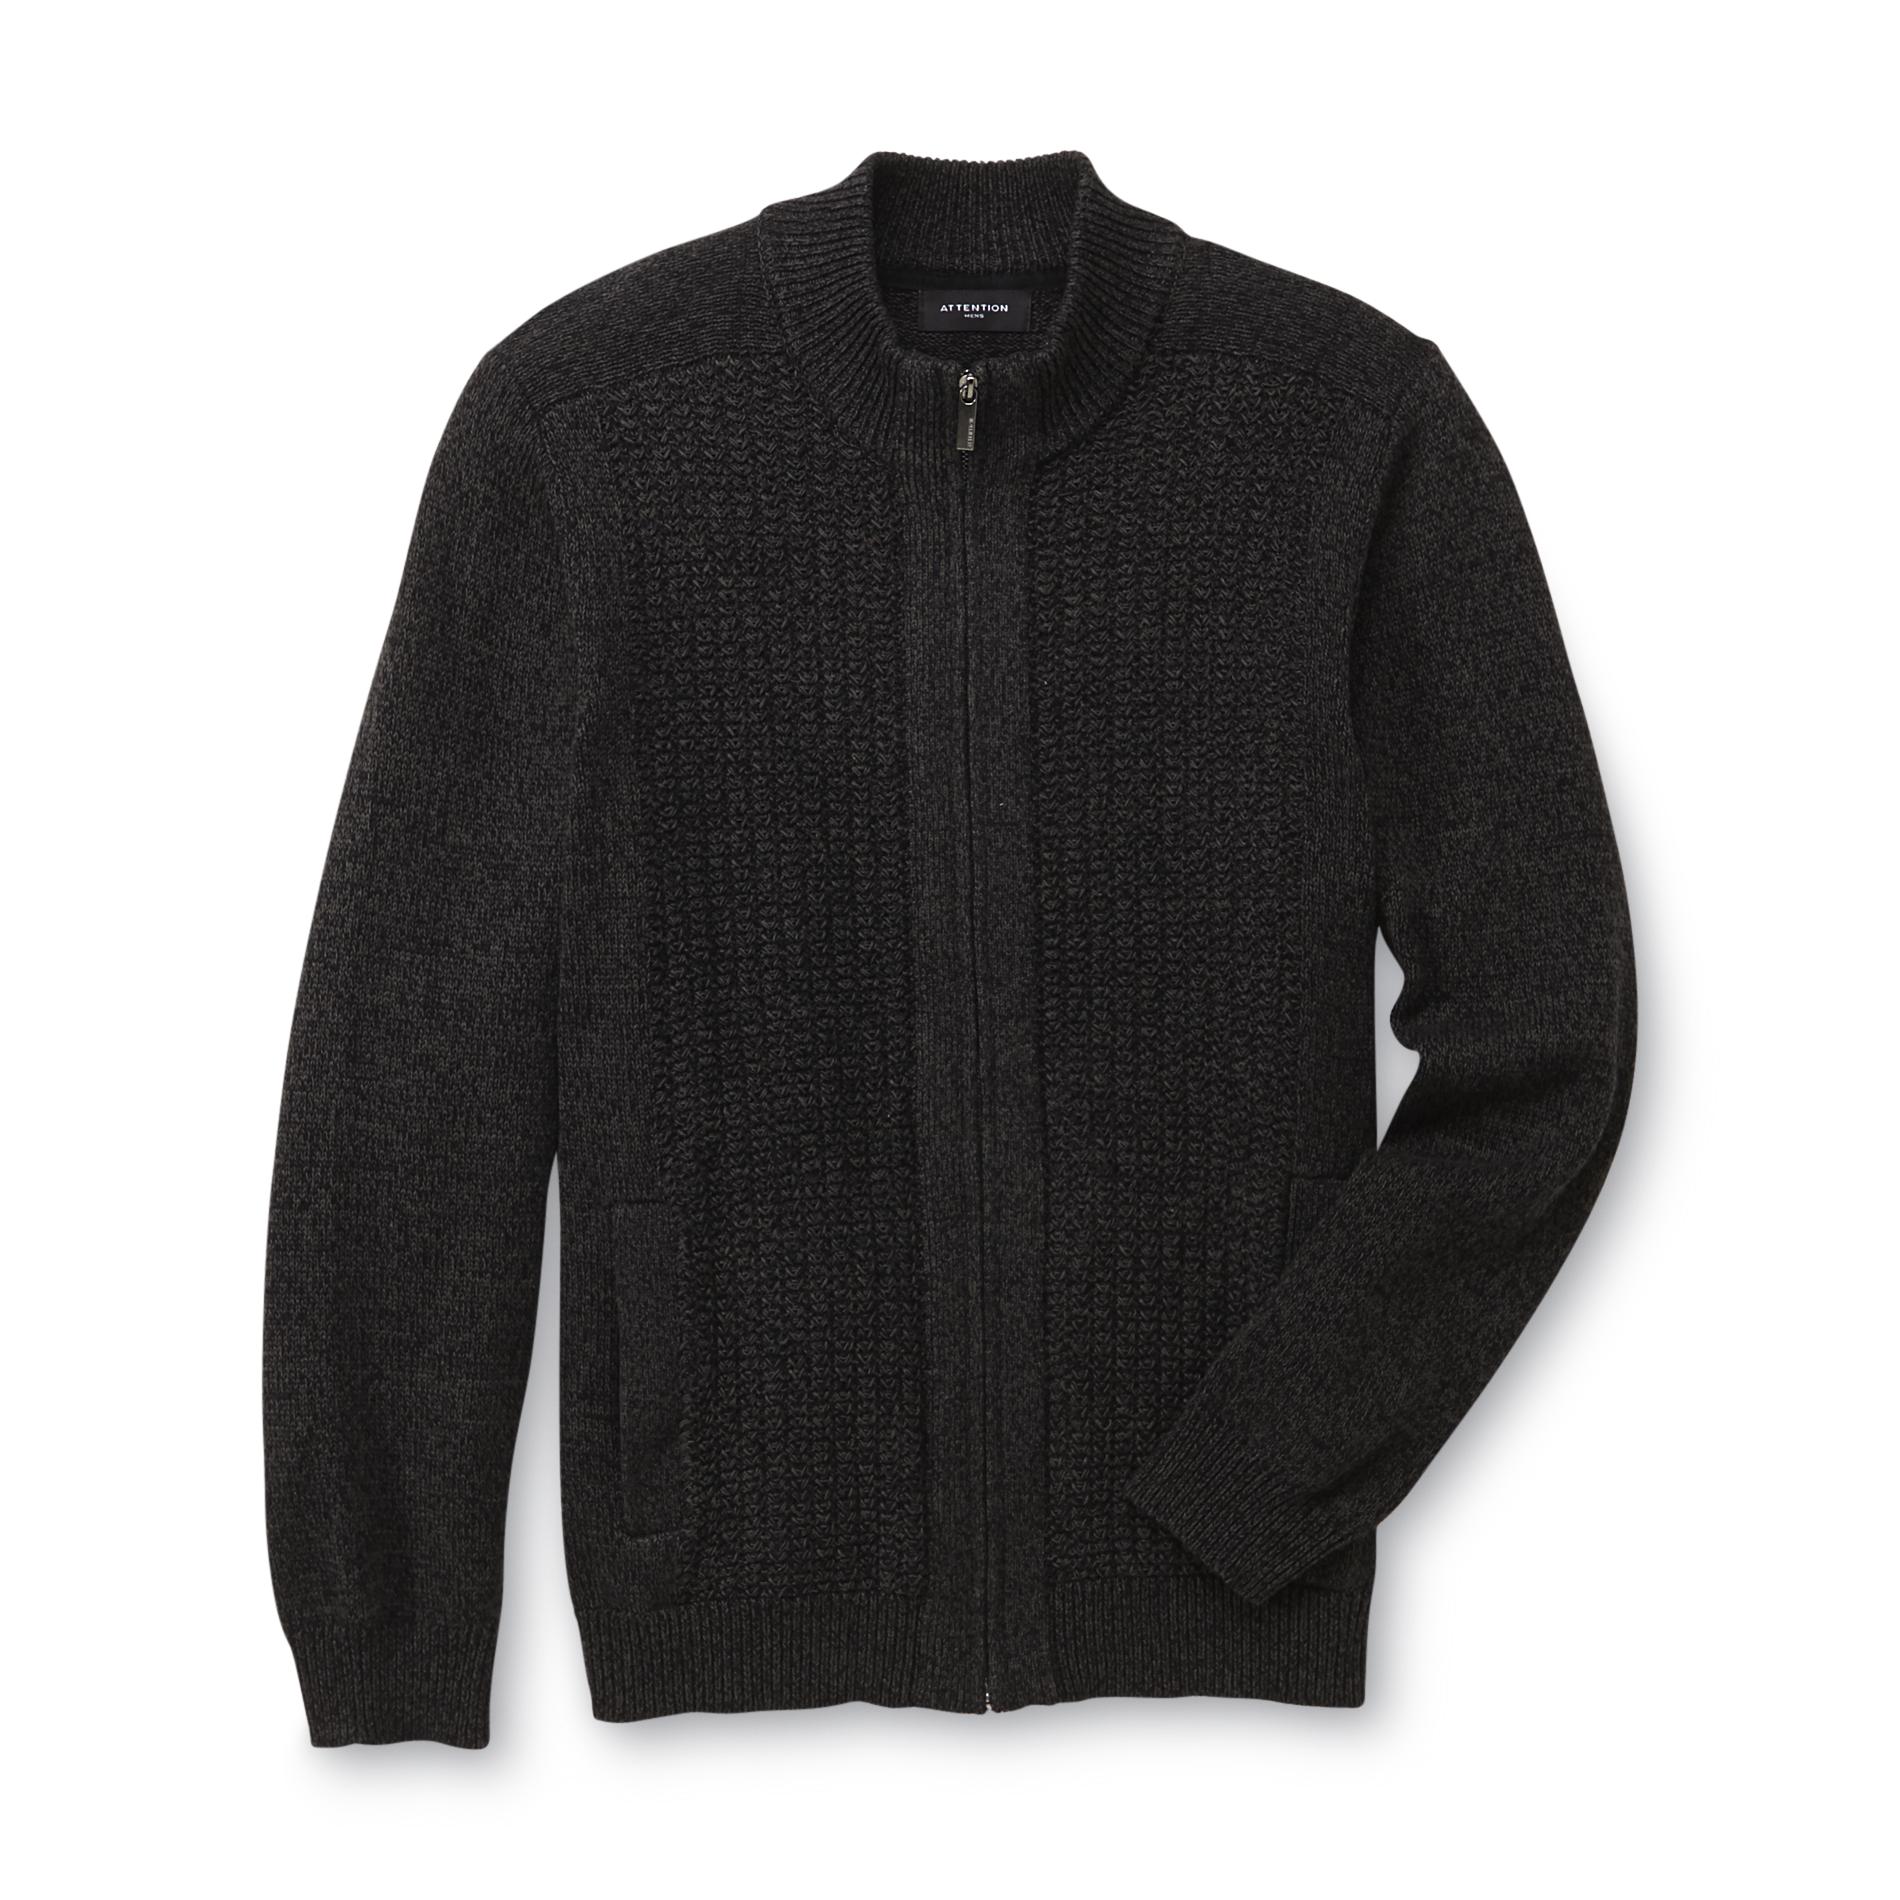 Attention Men's Zip-Up Knit Cardigan Sweater